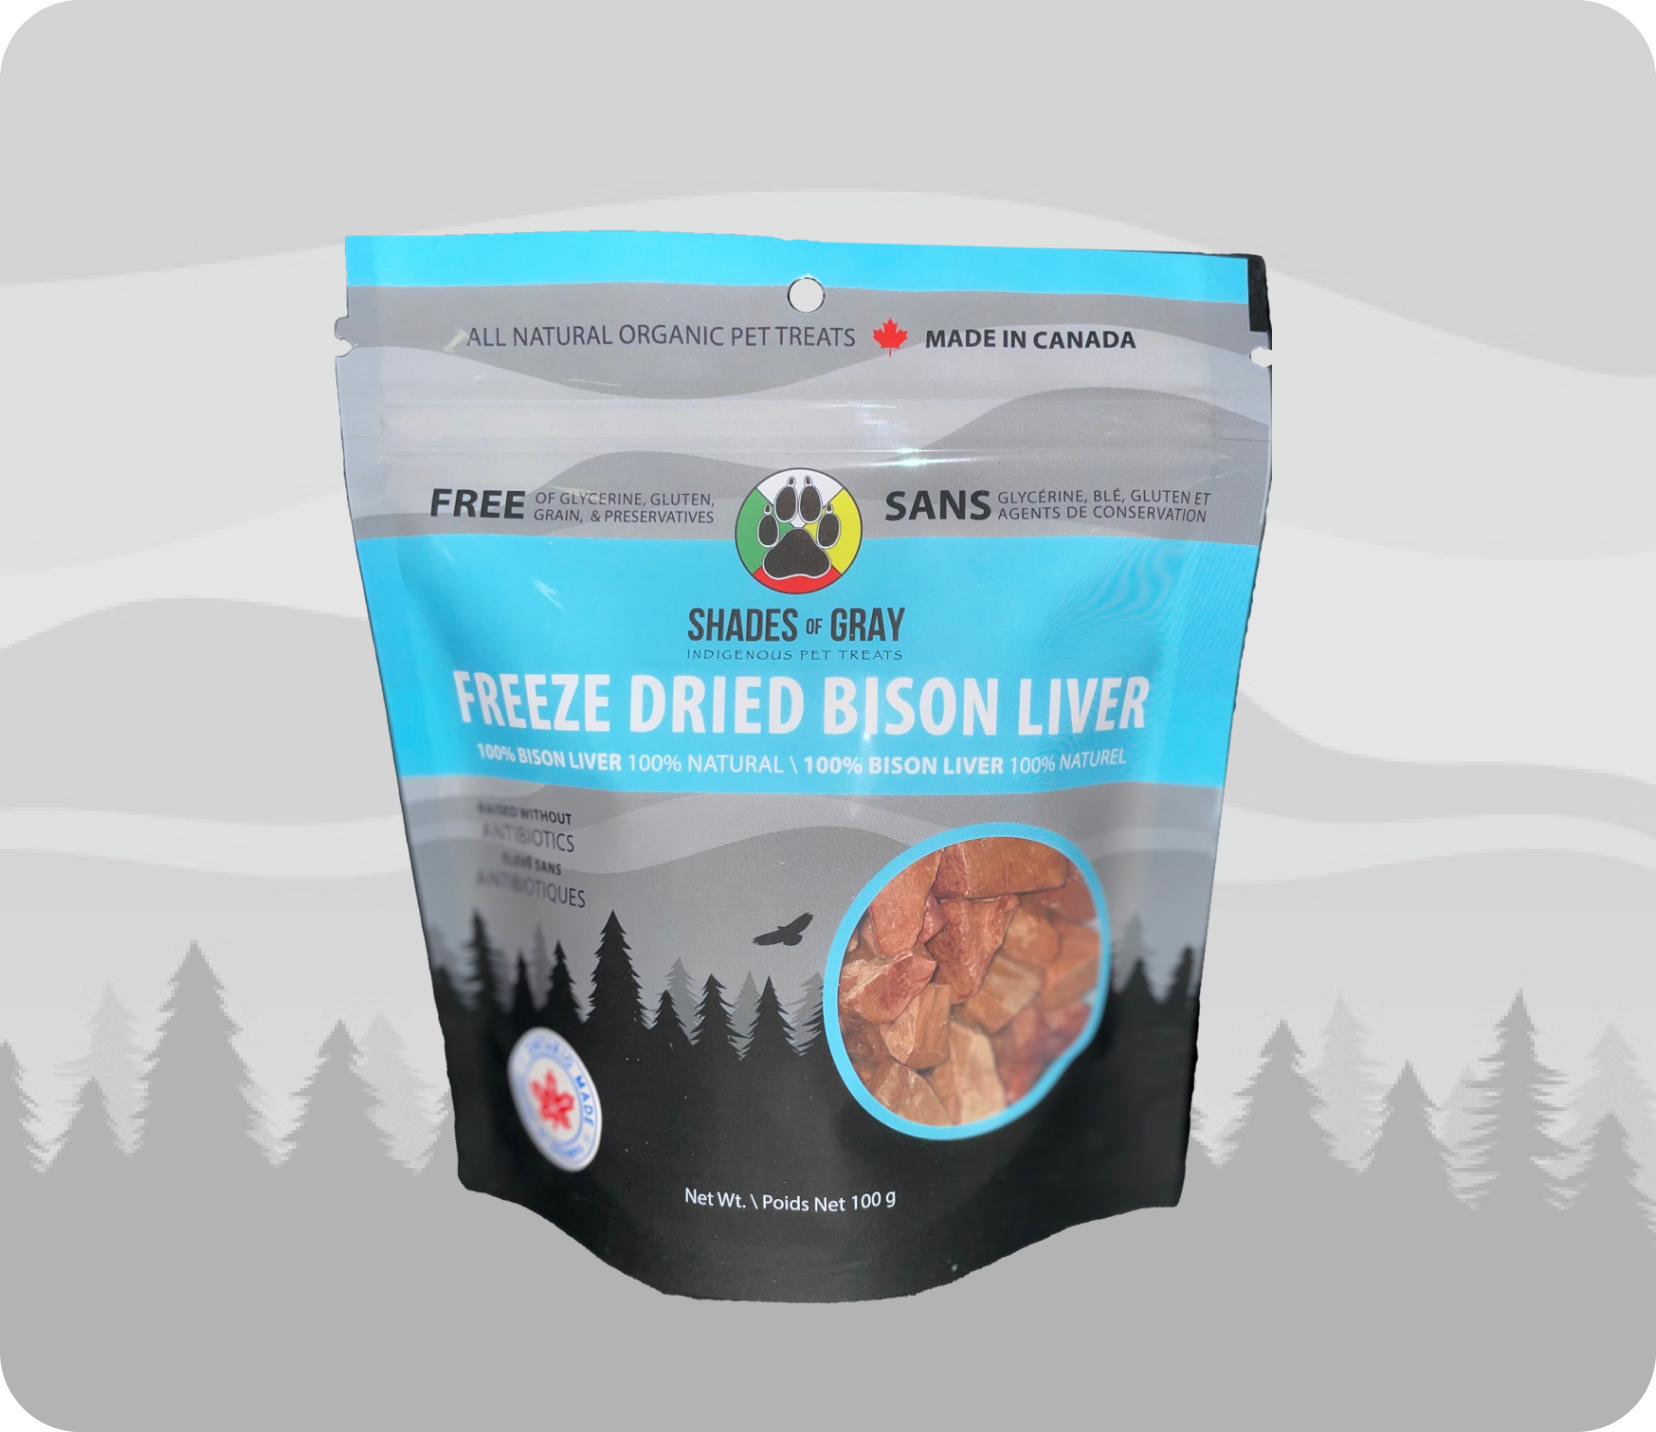 Freeze Dried Bison Liver Pet Treats made with organic all natural 100% Bison Liver, for your cats and dogs. Free of Glycerine, Gluten, Grain & Preservatives.